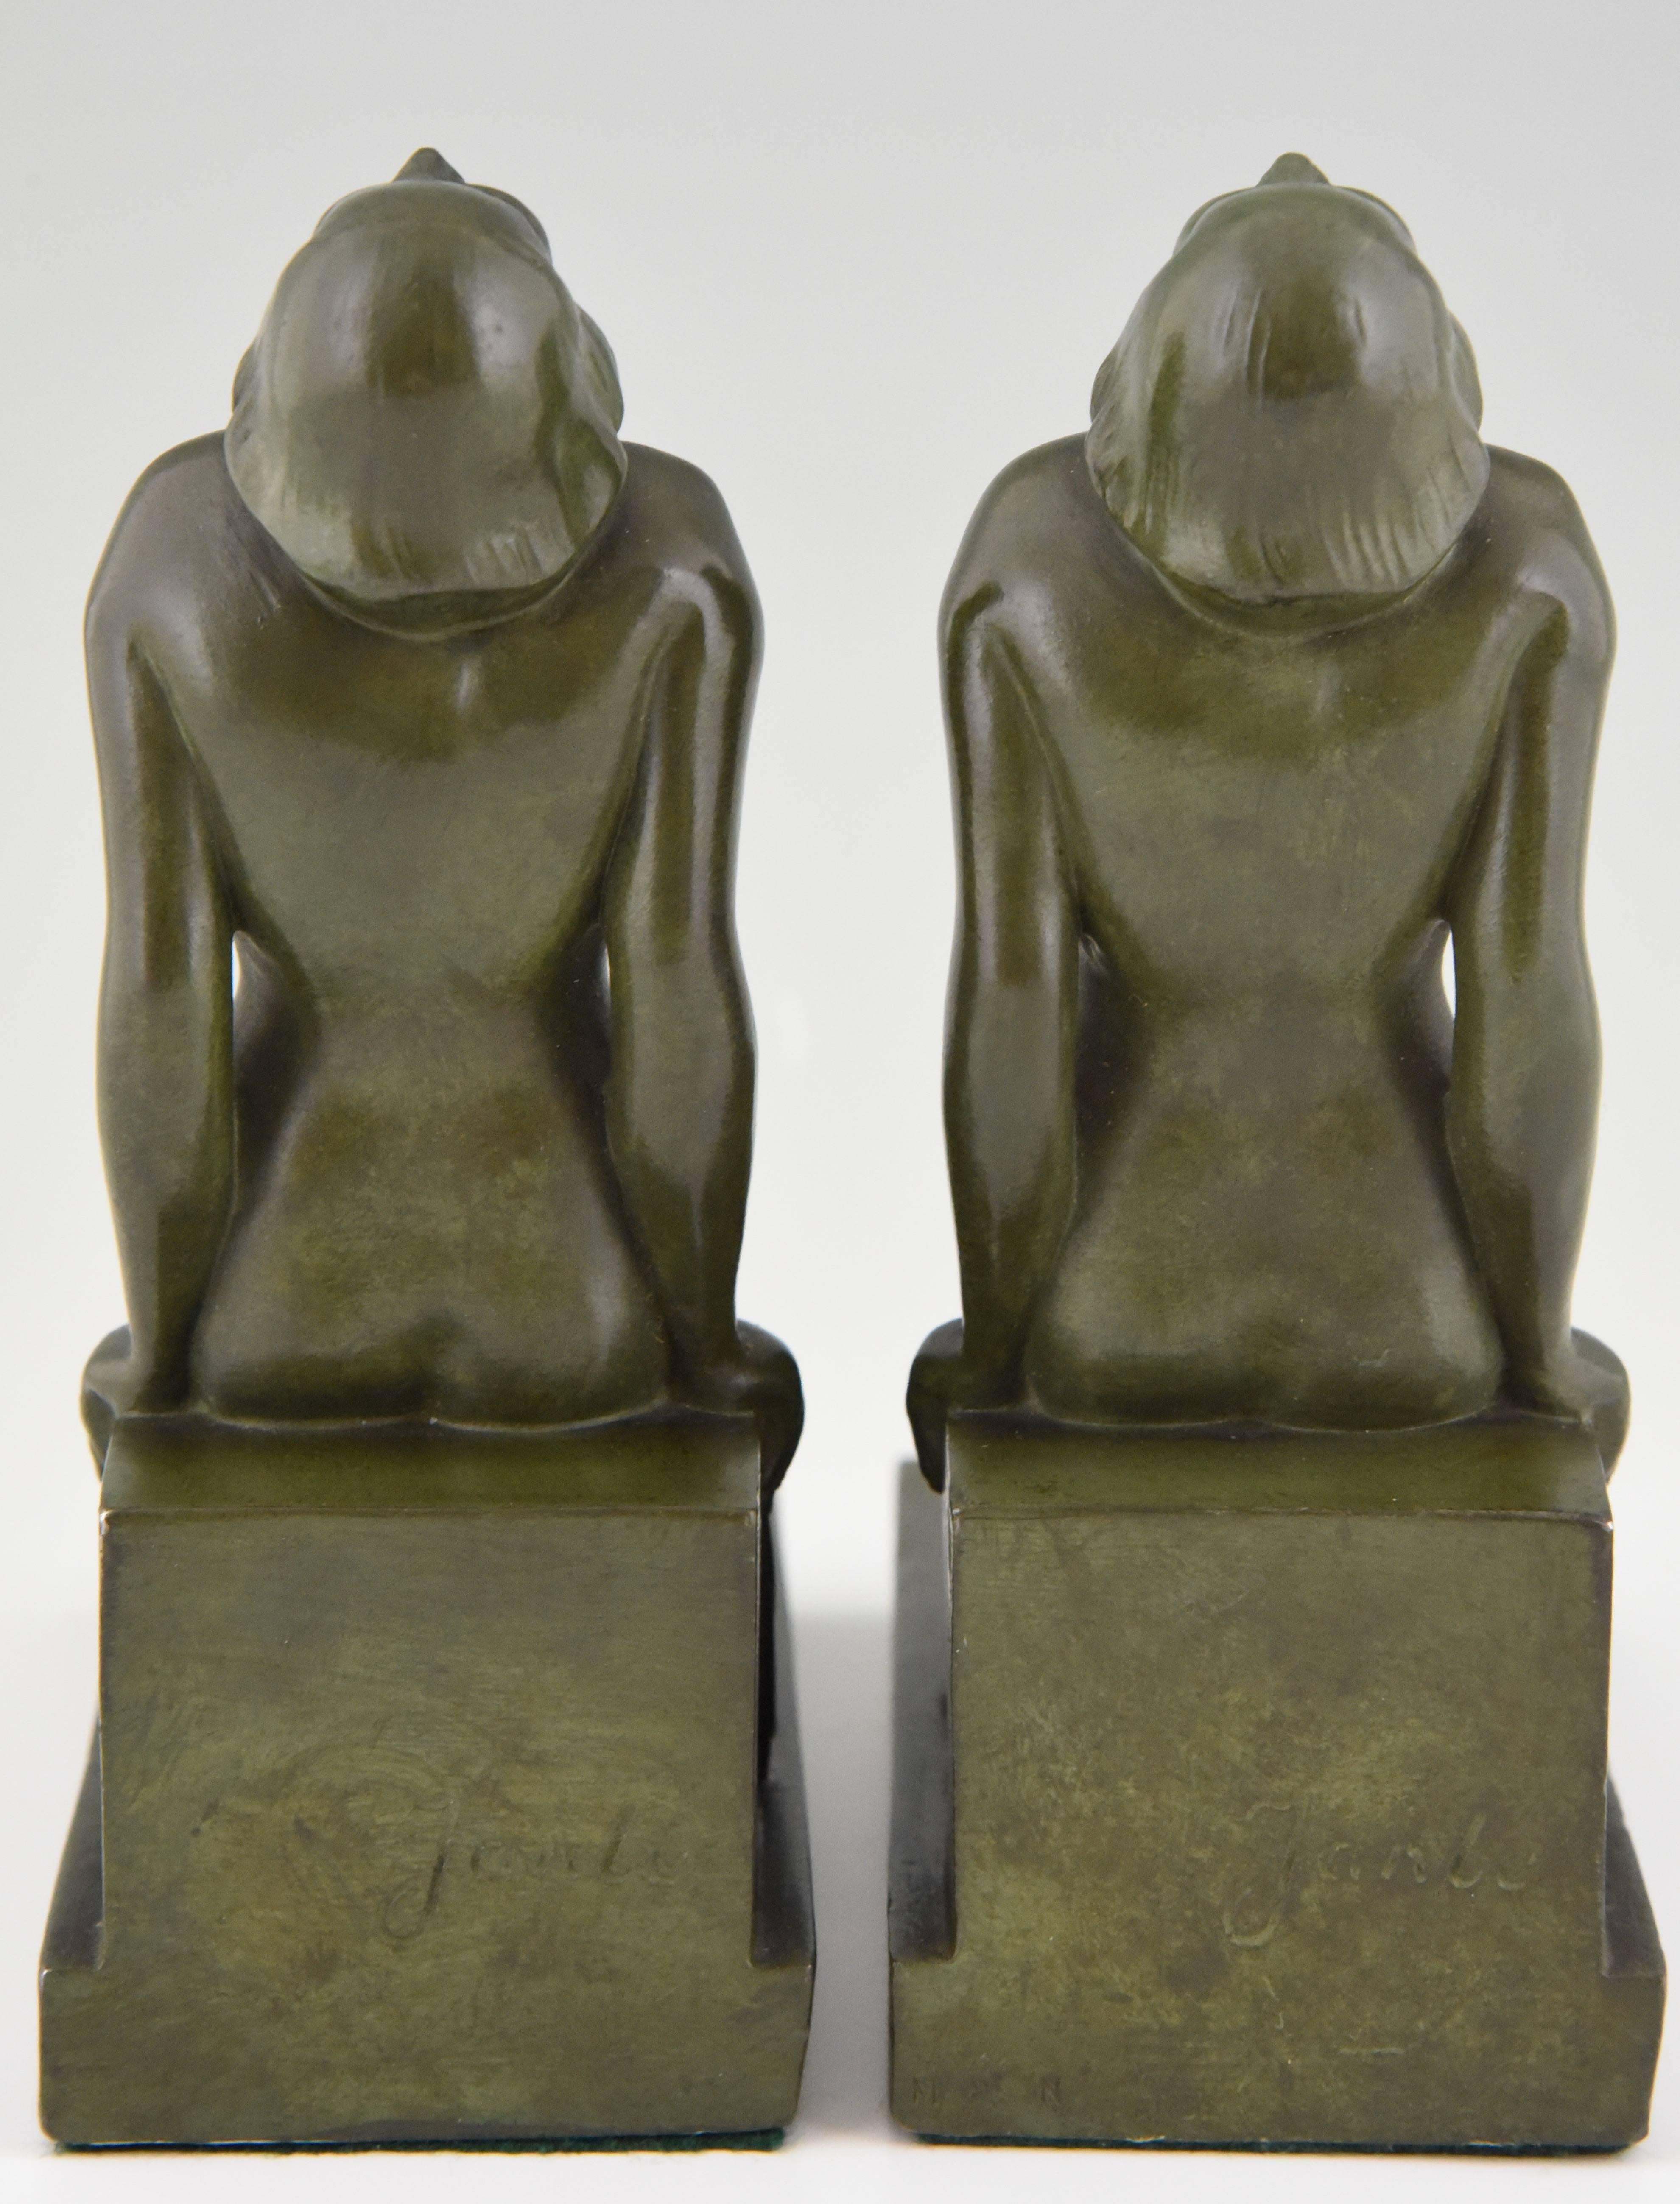 20th Century French Art Deco Bookends Sitting Nudes by Janle, 1930